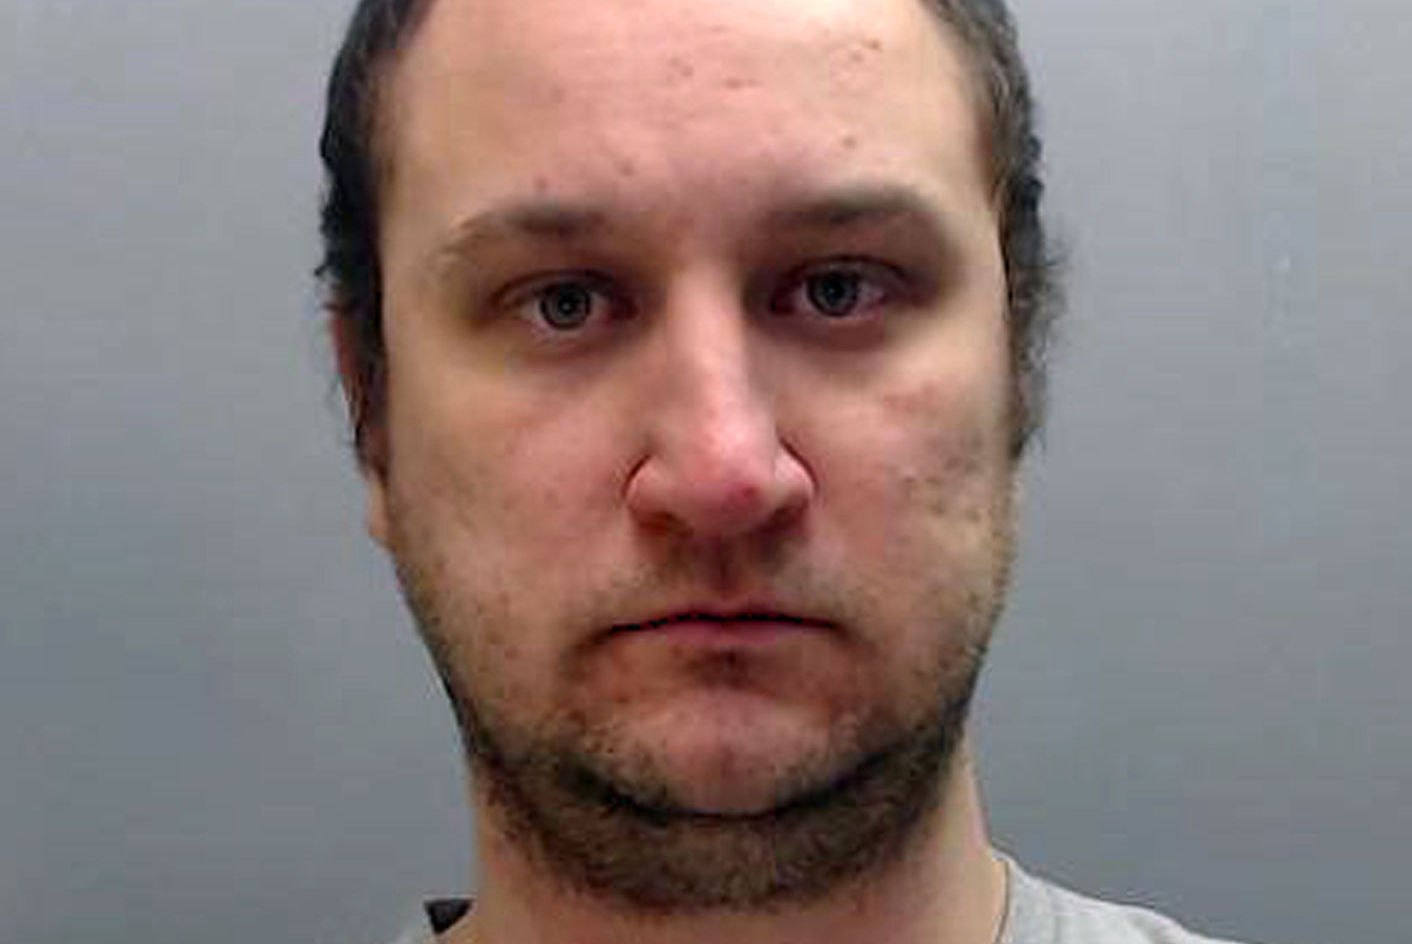 Paedophile police officer found guilty of raping 13-year-old girl